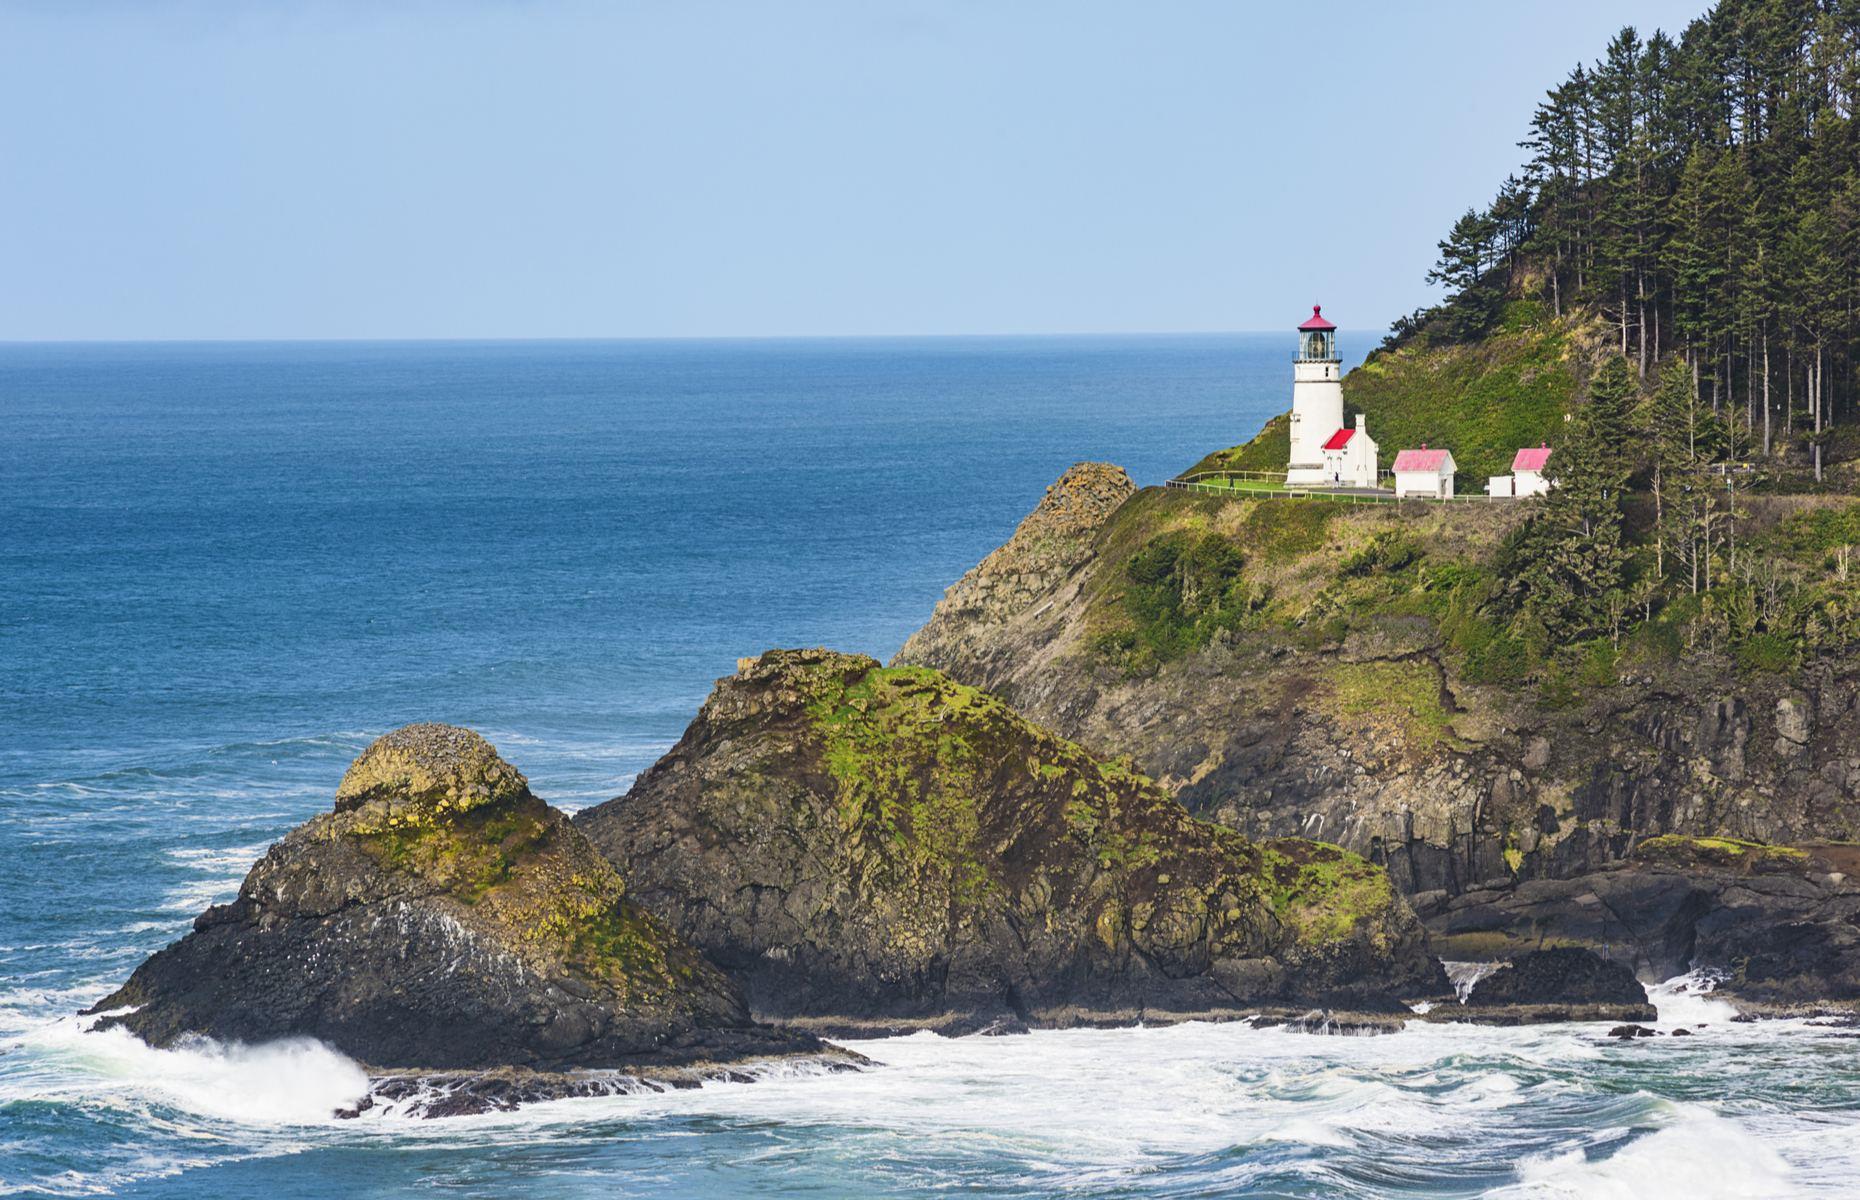 <p>The quaint Heceta Head Light is situated about halfway along Oregan's coastline and stands on an impressive 1,000-foot (305m) tall bluff above the crashing Pacific Ocean. The lighthouse was first lit in 1894 and it’s still guiding mariners to this day, using an automated light which is the most powerful rated on Oregon's coast. The keeper's cottage has been transformed into a B&B which offers unbeatable views of the cliffs and beach below too. </p>